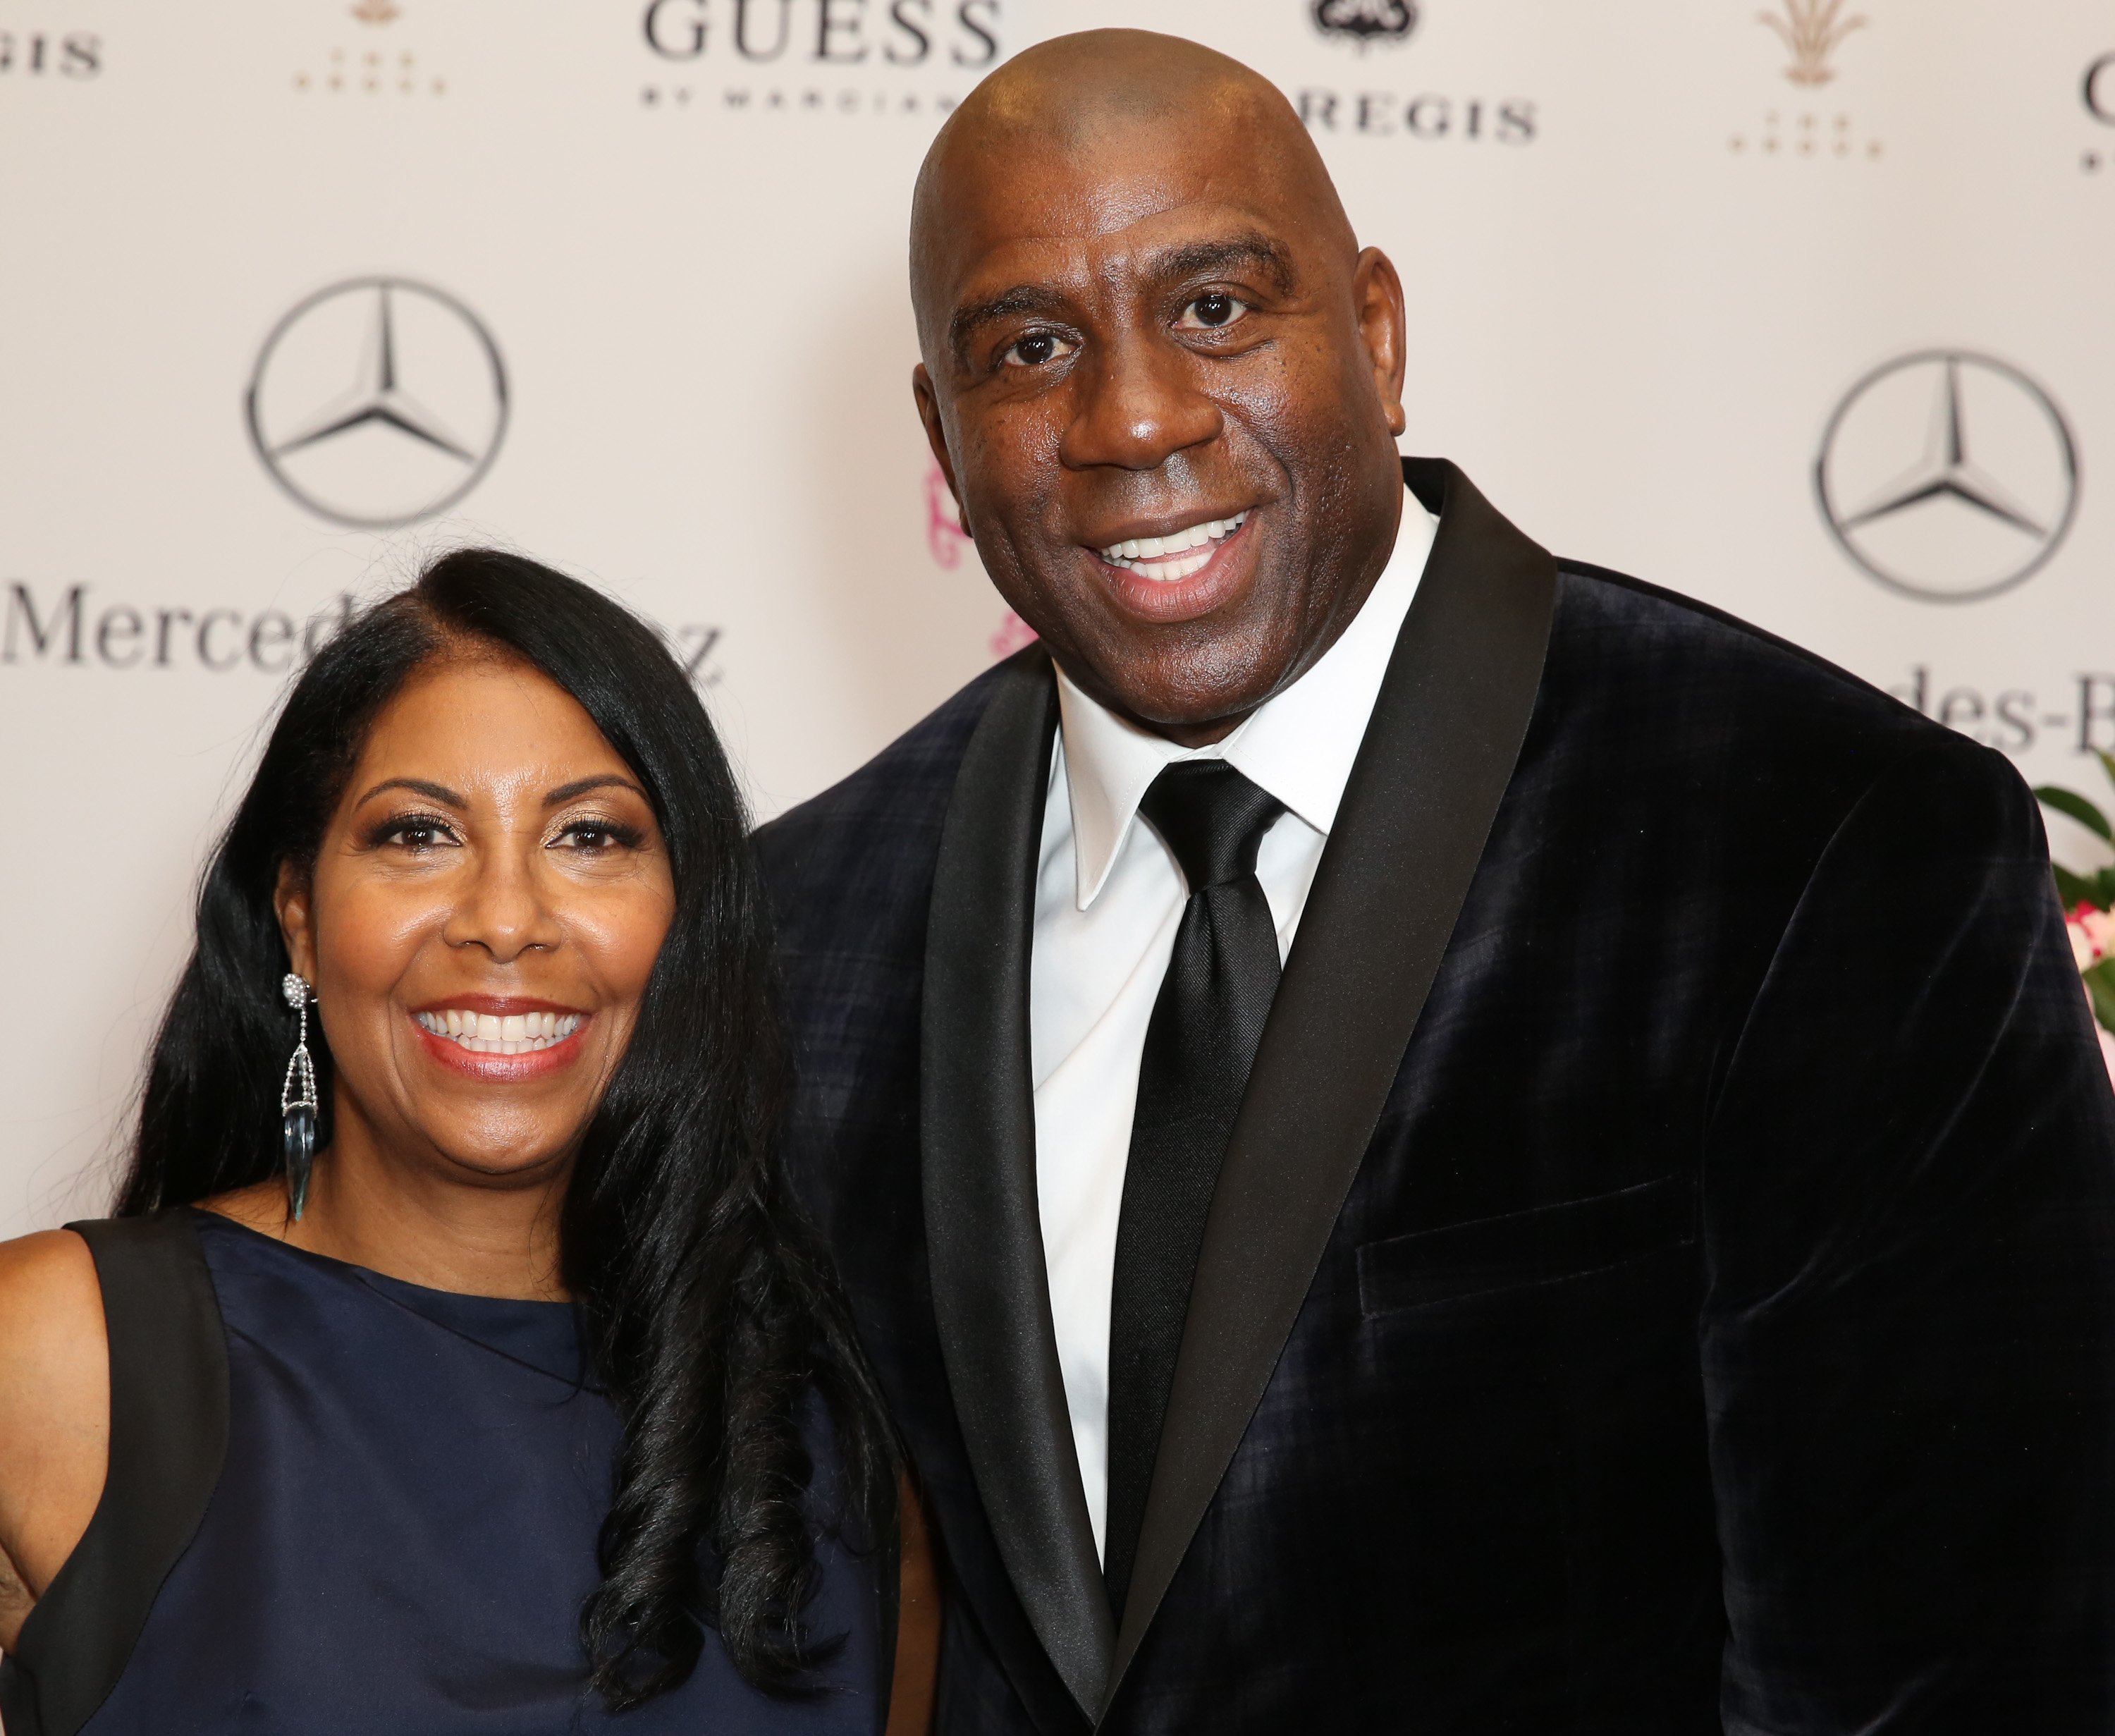 Magic and Cookie Johnson at the Mercedes-Benz Diabetes benefit event in October 2014 | Source: Getty Images/GlobalImagesUkraine